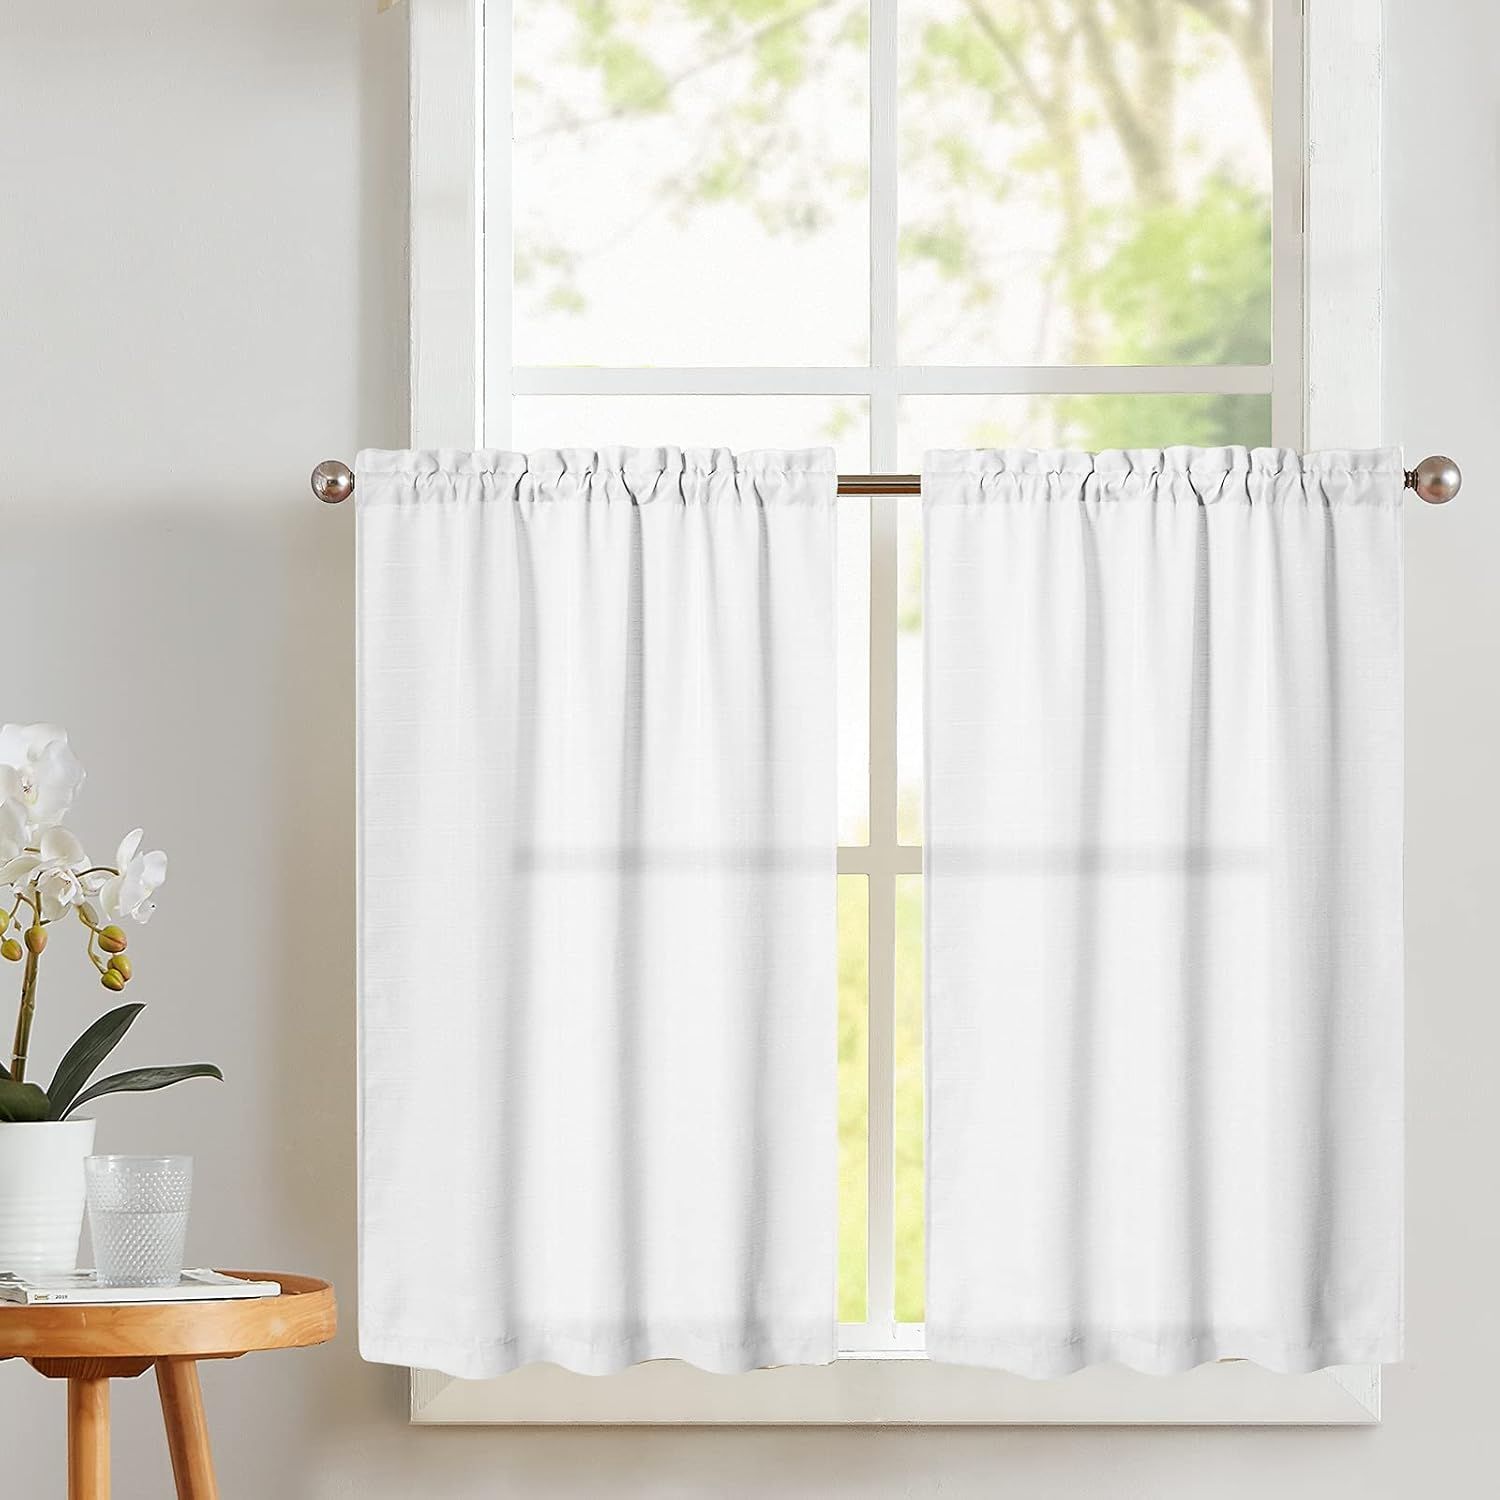 

Collact Kitchen Curtains Length Cafe Curtains Casual Weave Textured Semi Sheer Short Curtains For Bathroom Bedroom Tier Curtains Rod Pocket Half Window Curtains 2 Panels